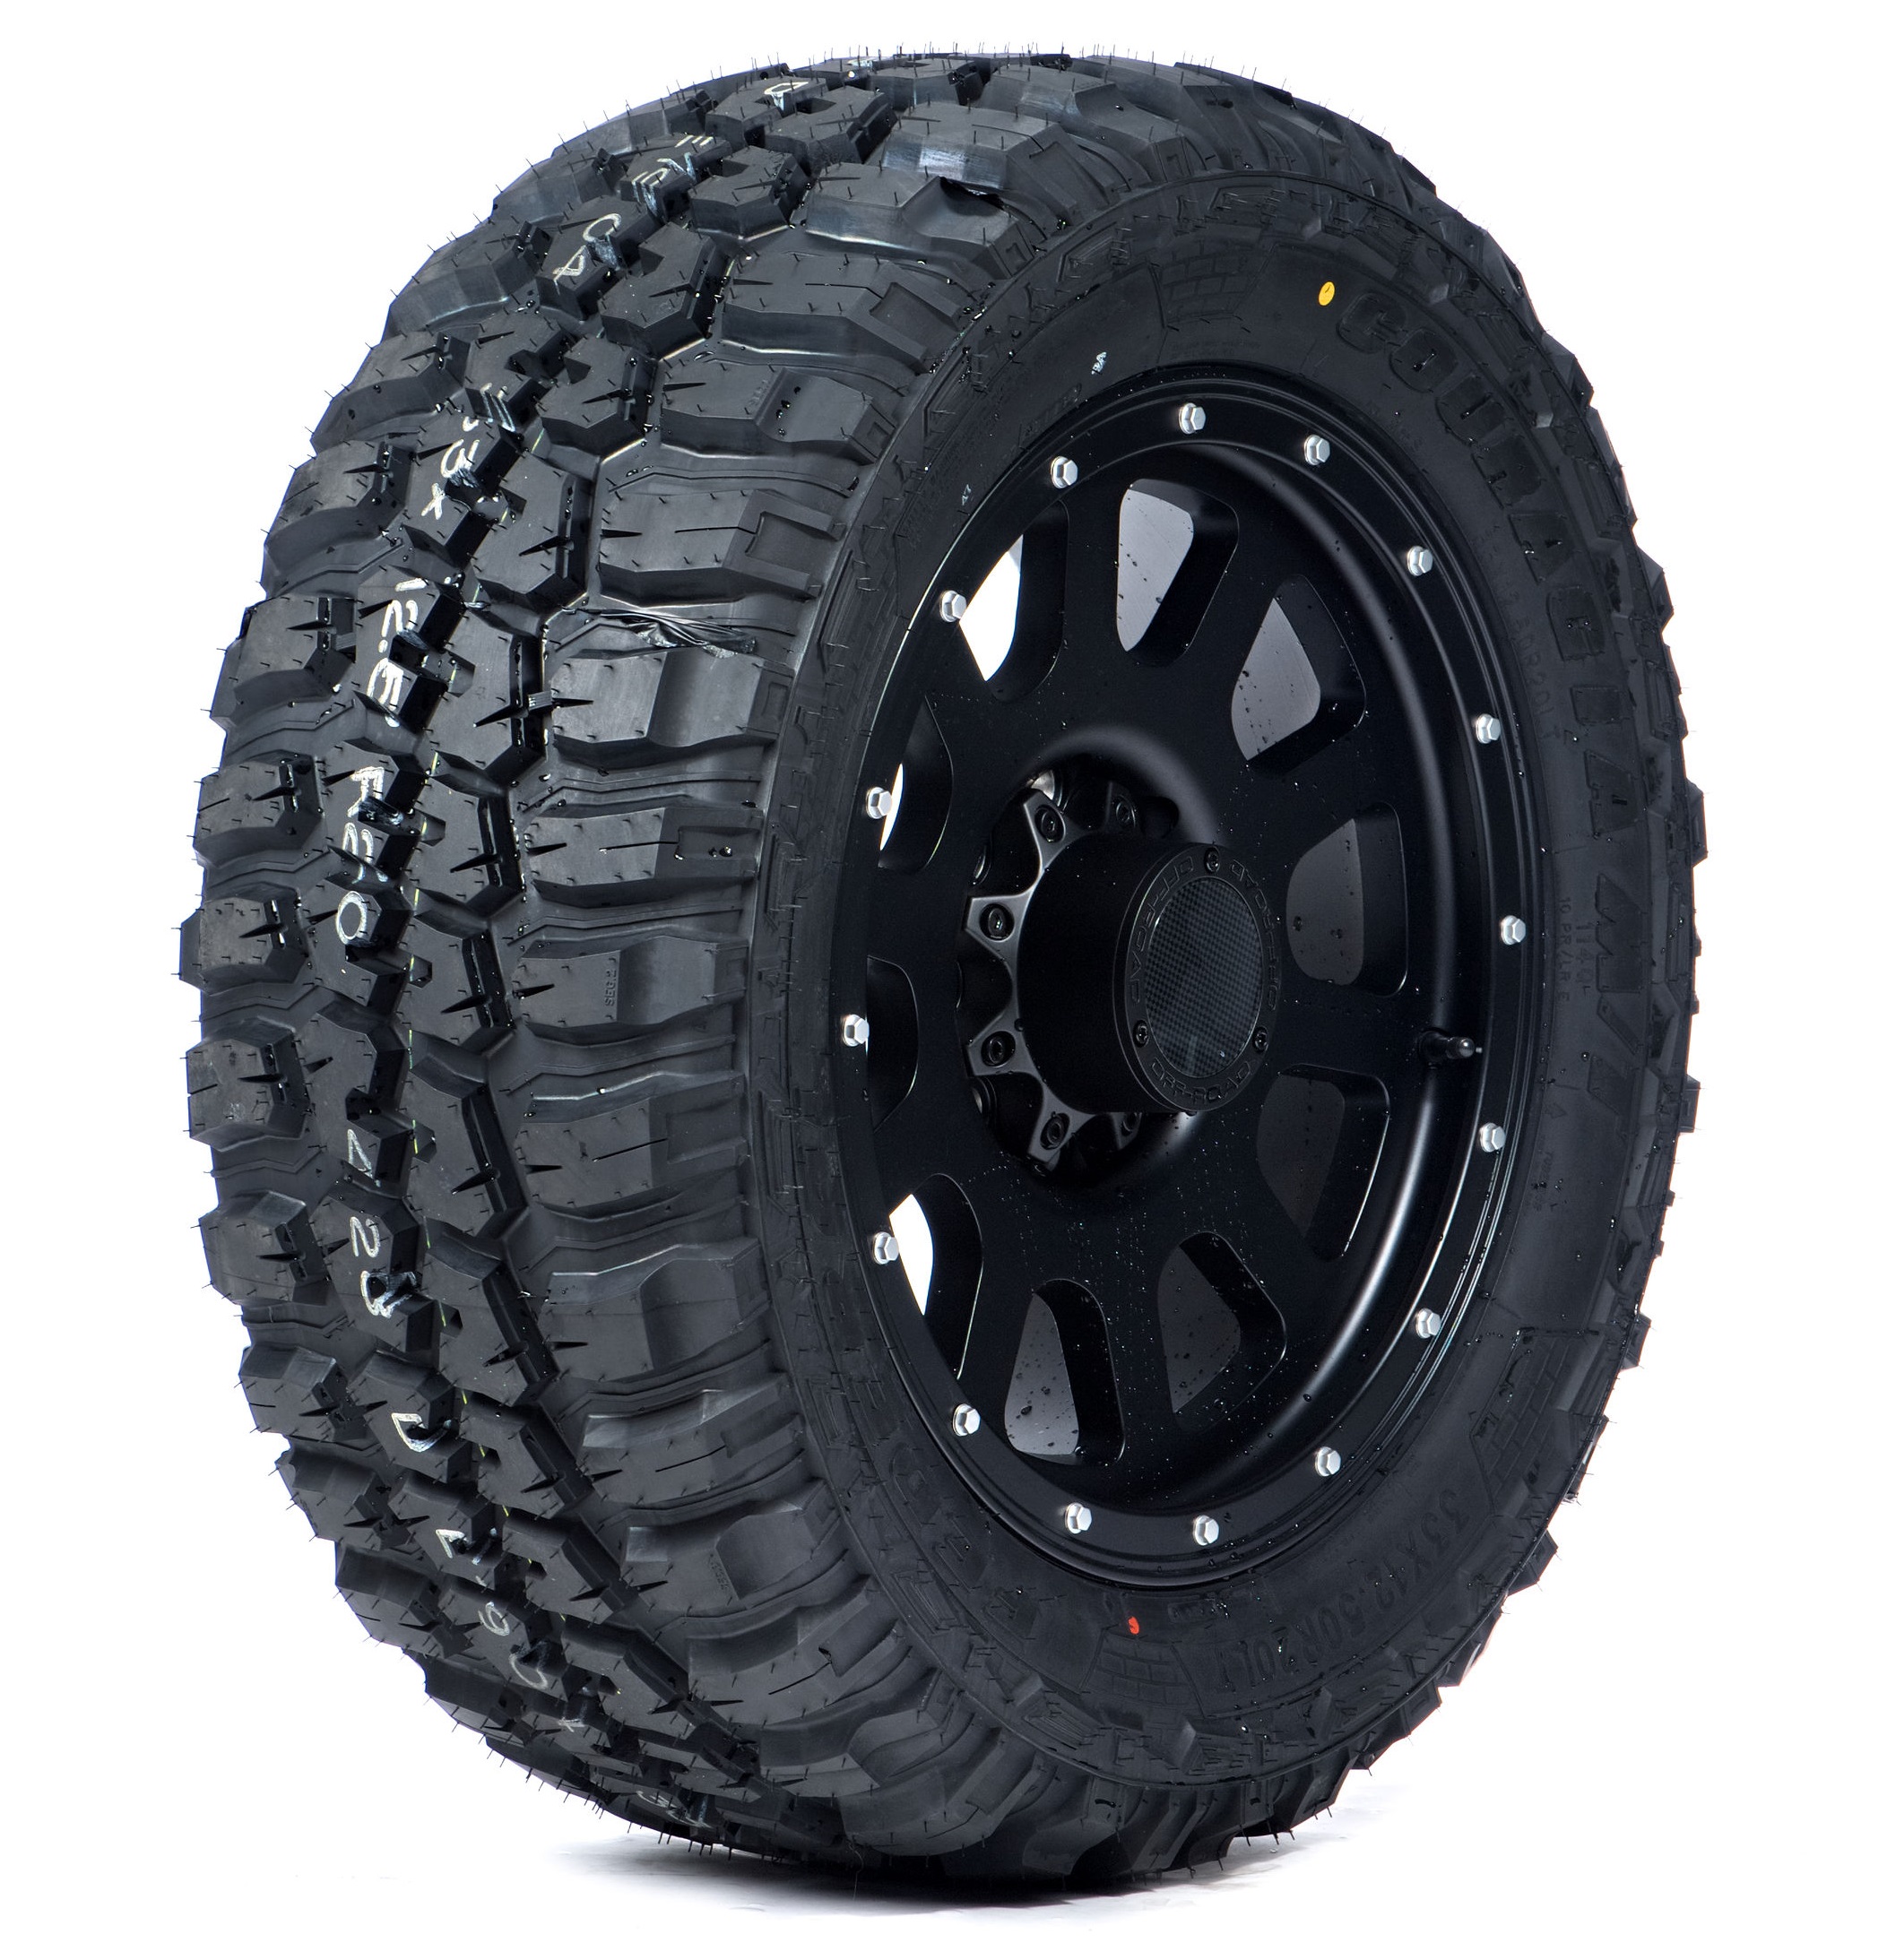 Federal Couragia M/T Mud-Terrain Tire - 33X12.50R20 LRE 10PLY - image 3 of 5